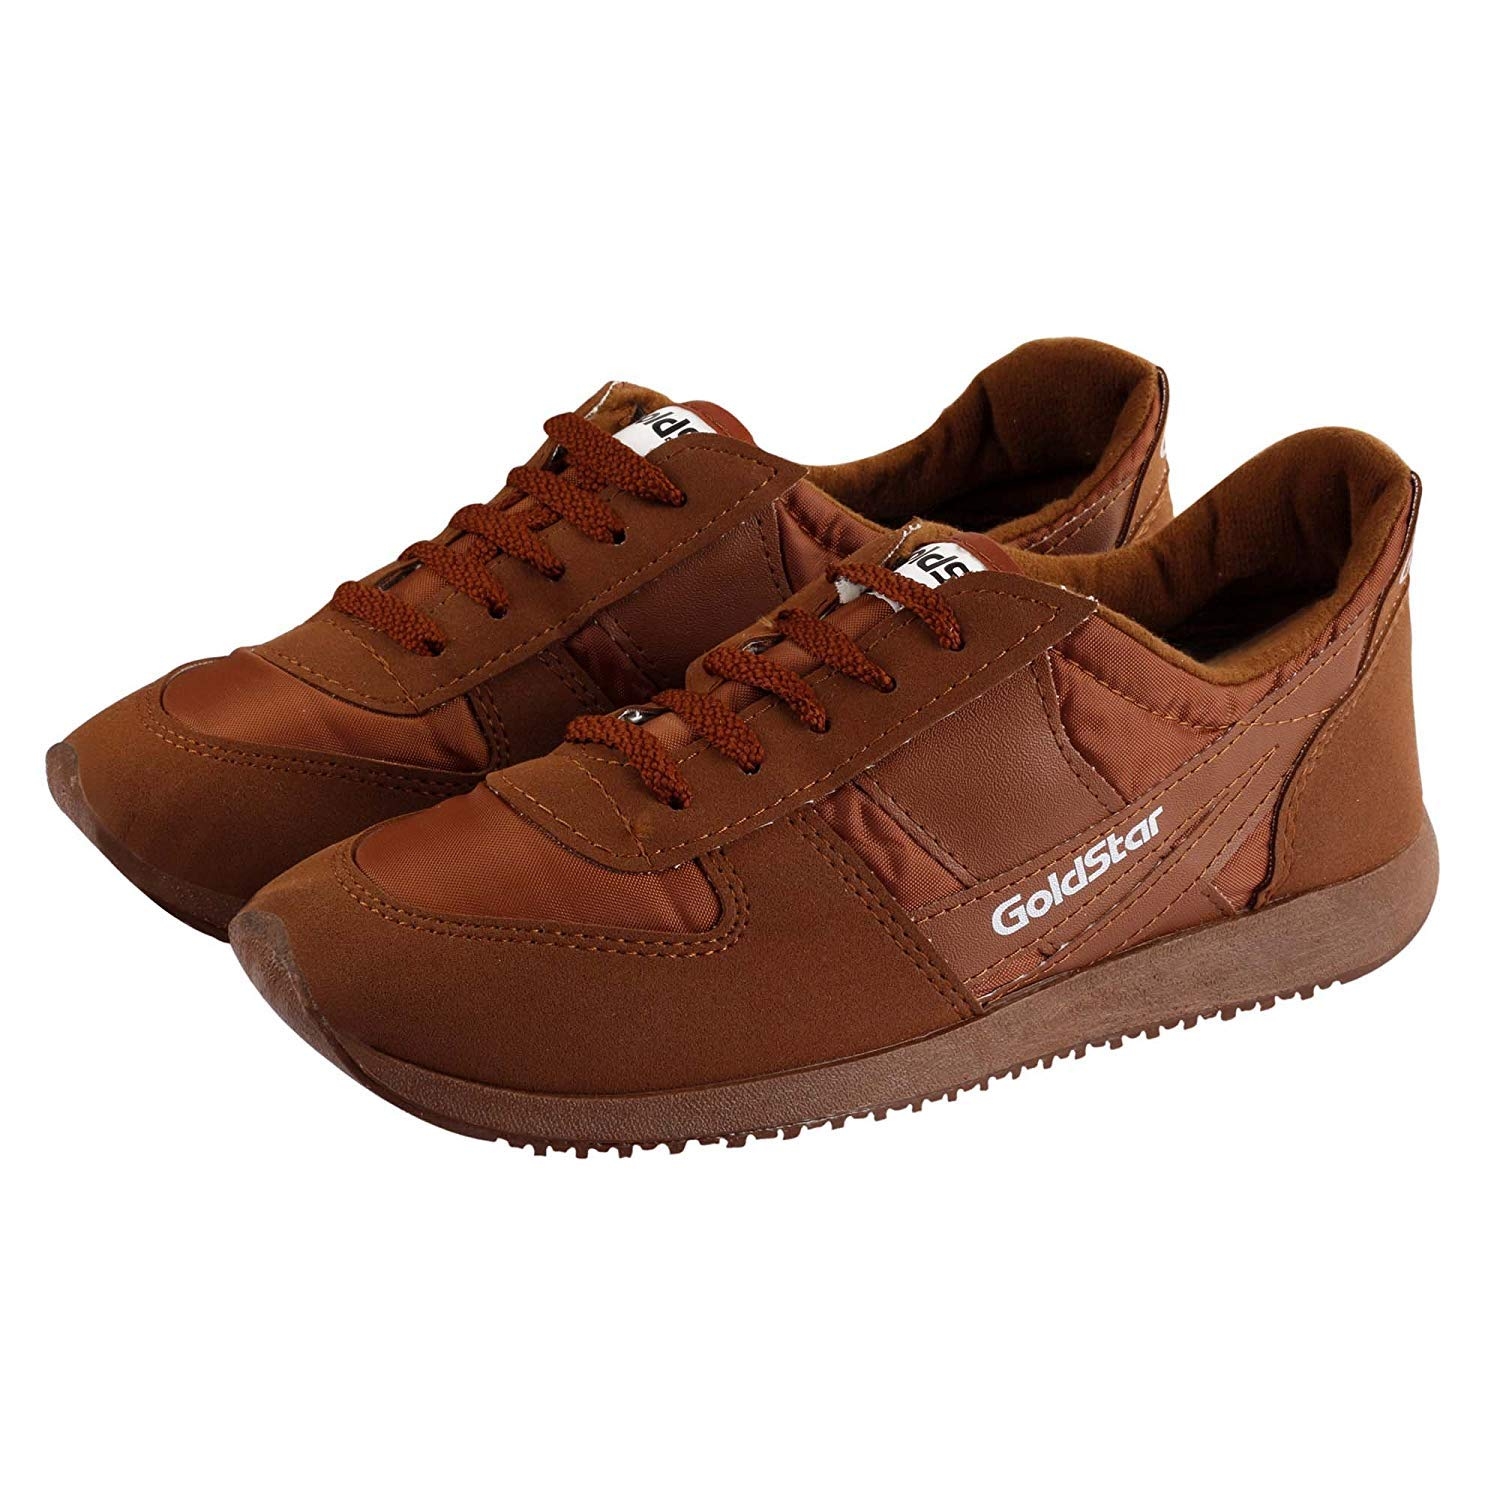 Goldstar | GOLDSTAR 32-Brown Nylon Lace-Up  Latest Stylish Lightweight Shoes for Running, Walking, Gym,Trekking, Hiking & Party Running Shoes for Men